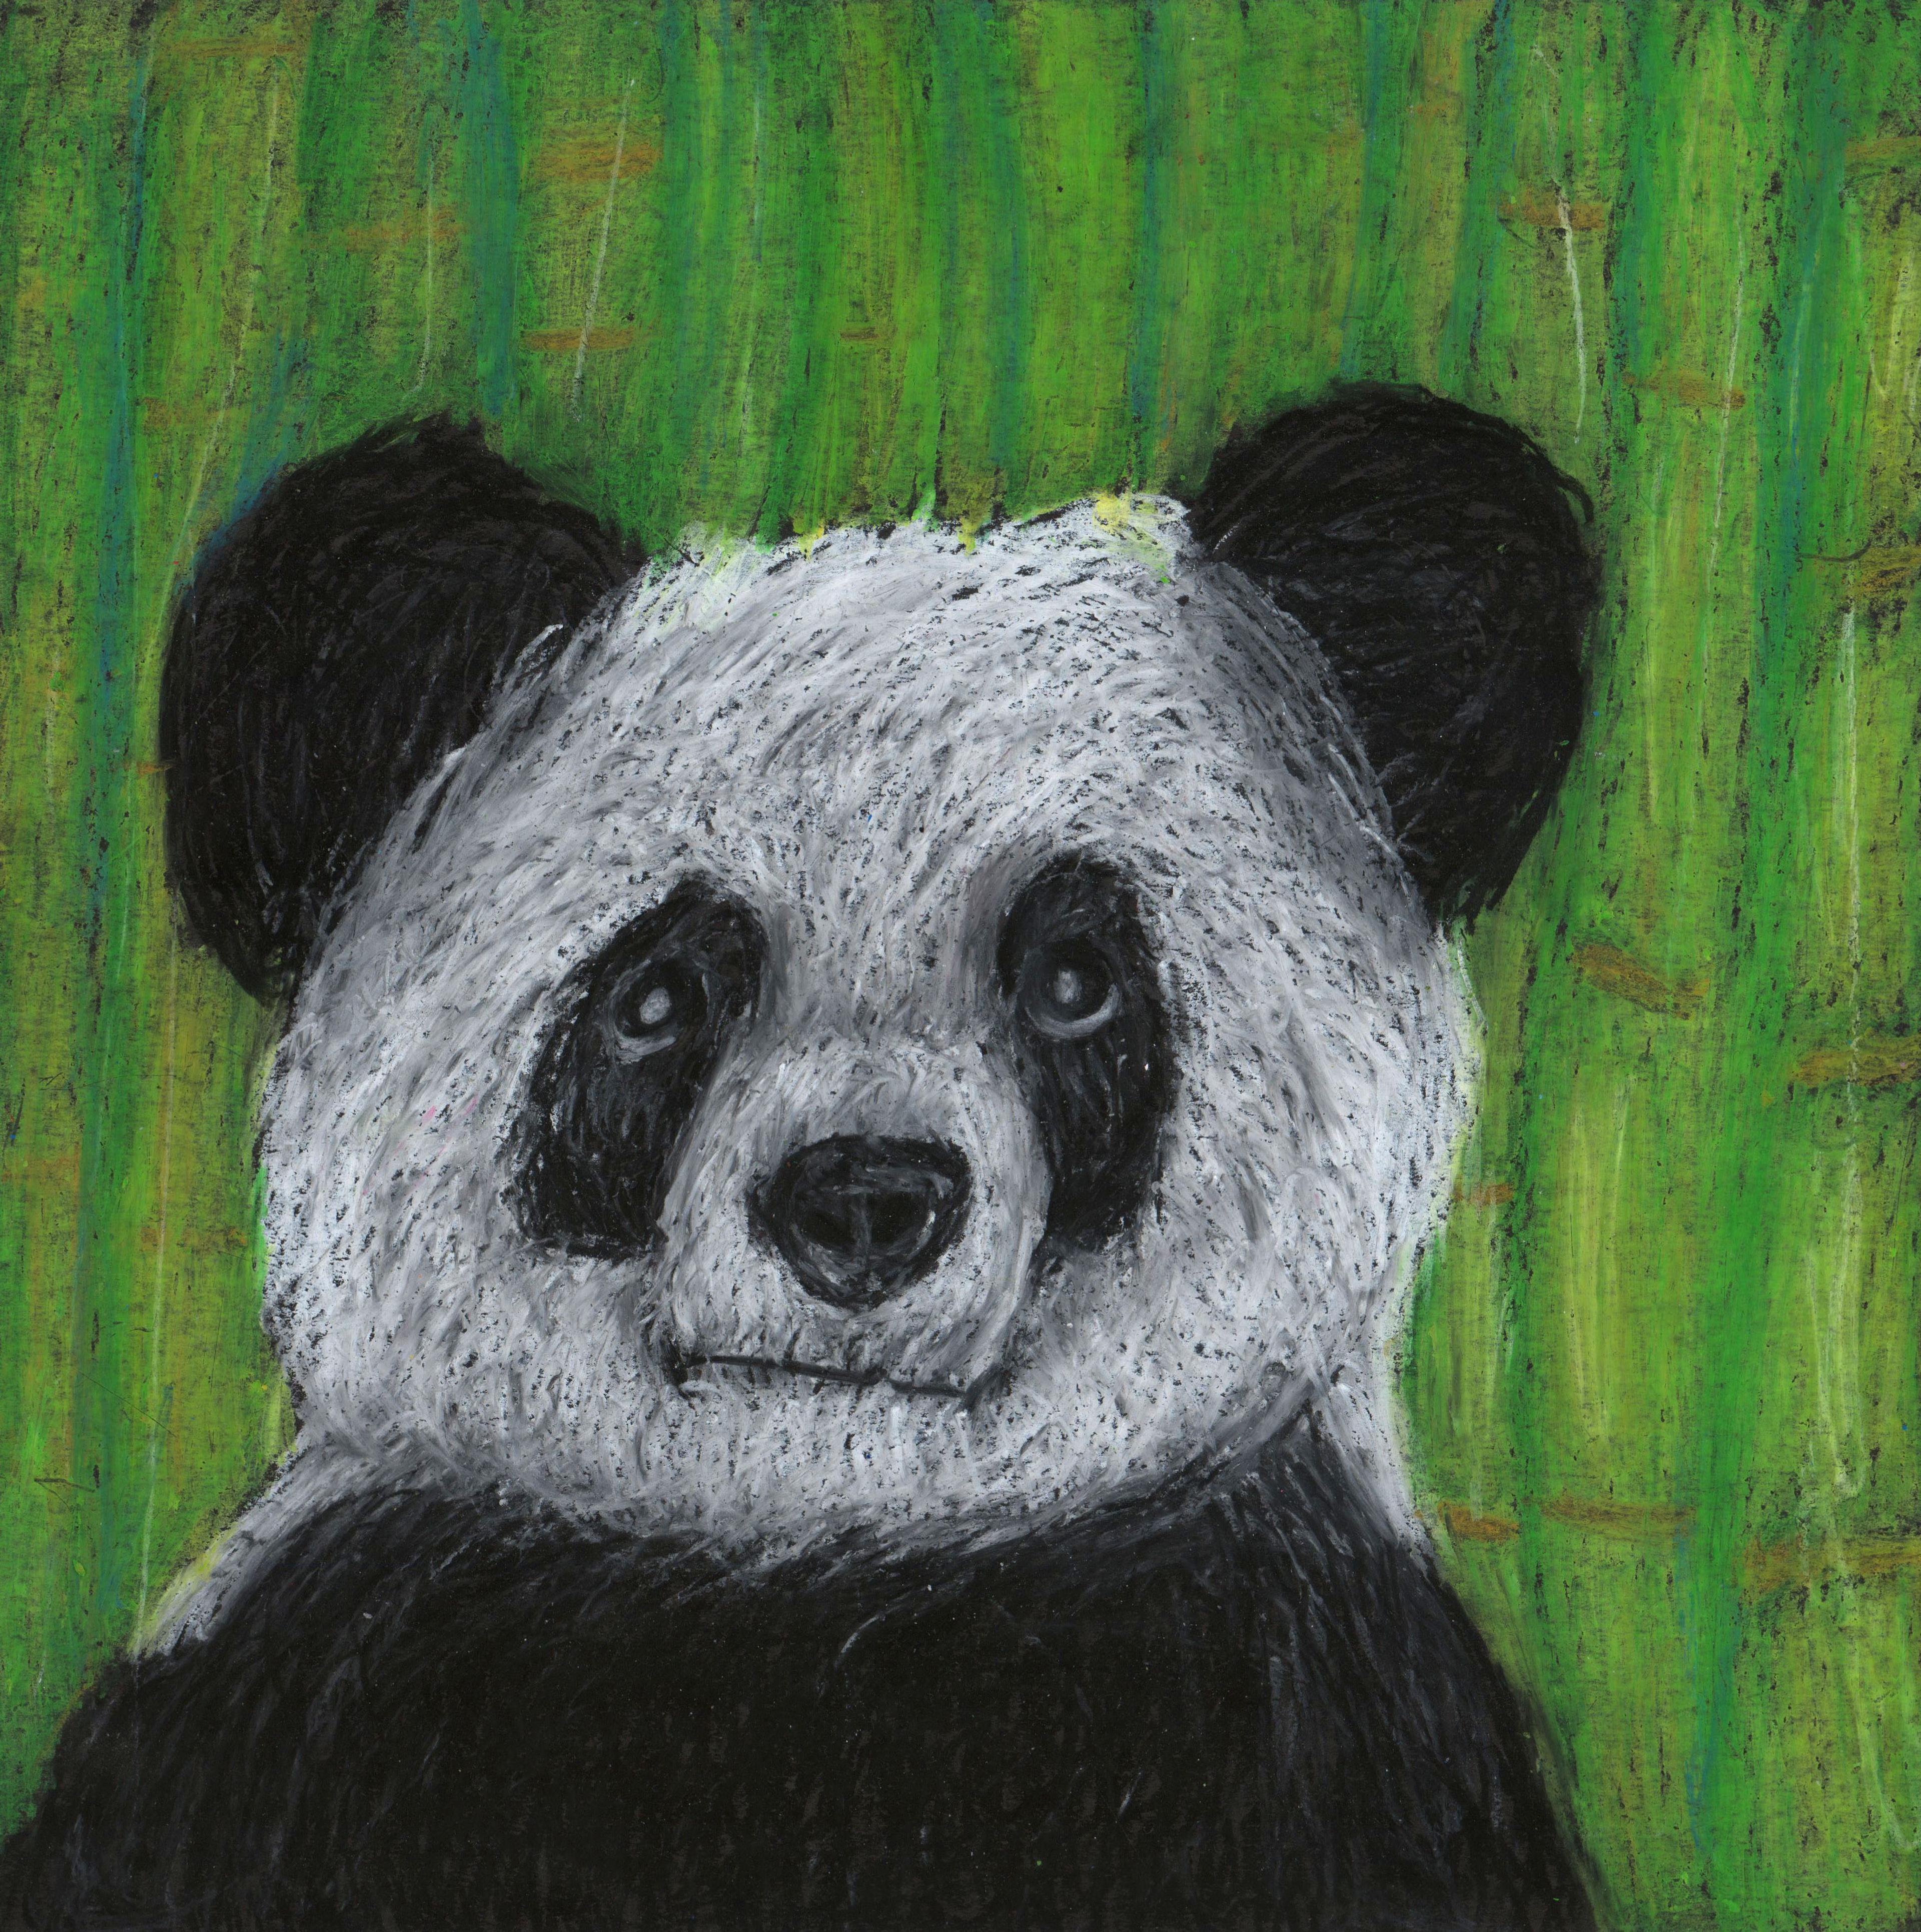 Oil pastel portrait drawing of a black and white panda facing the viewer, shown from the chest up. Tall green bamboo stalks rise up behind the bear in the background.